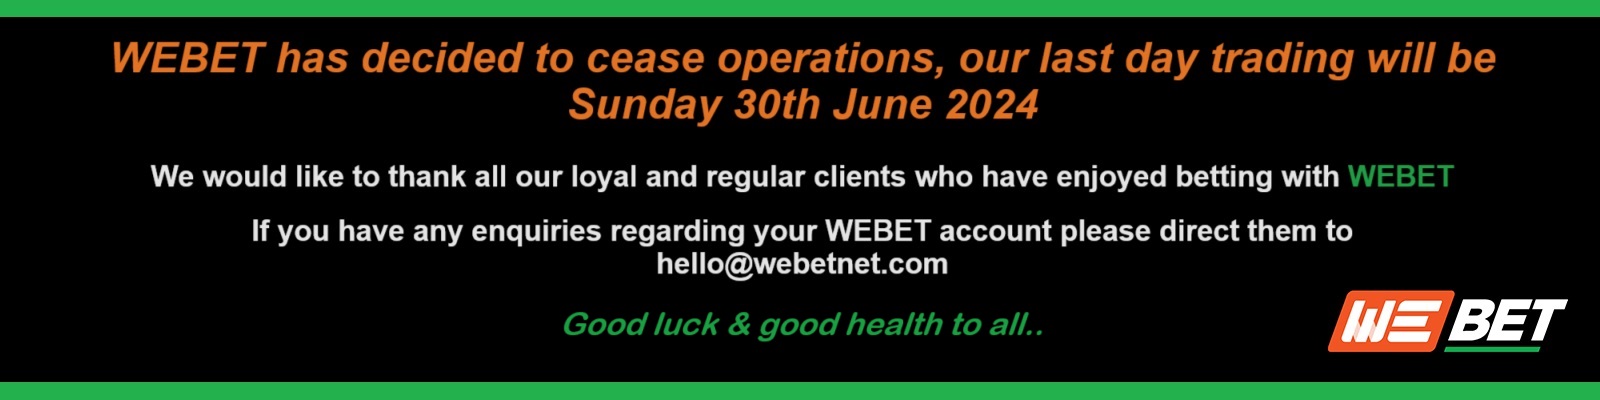 WeBet has decided to cease operations